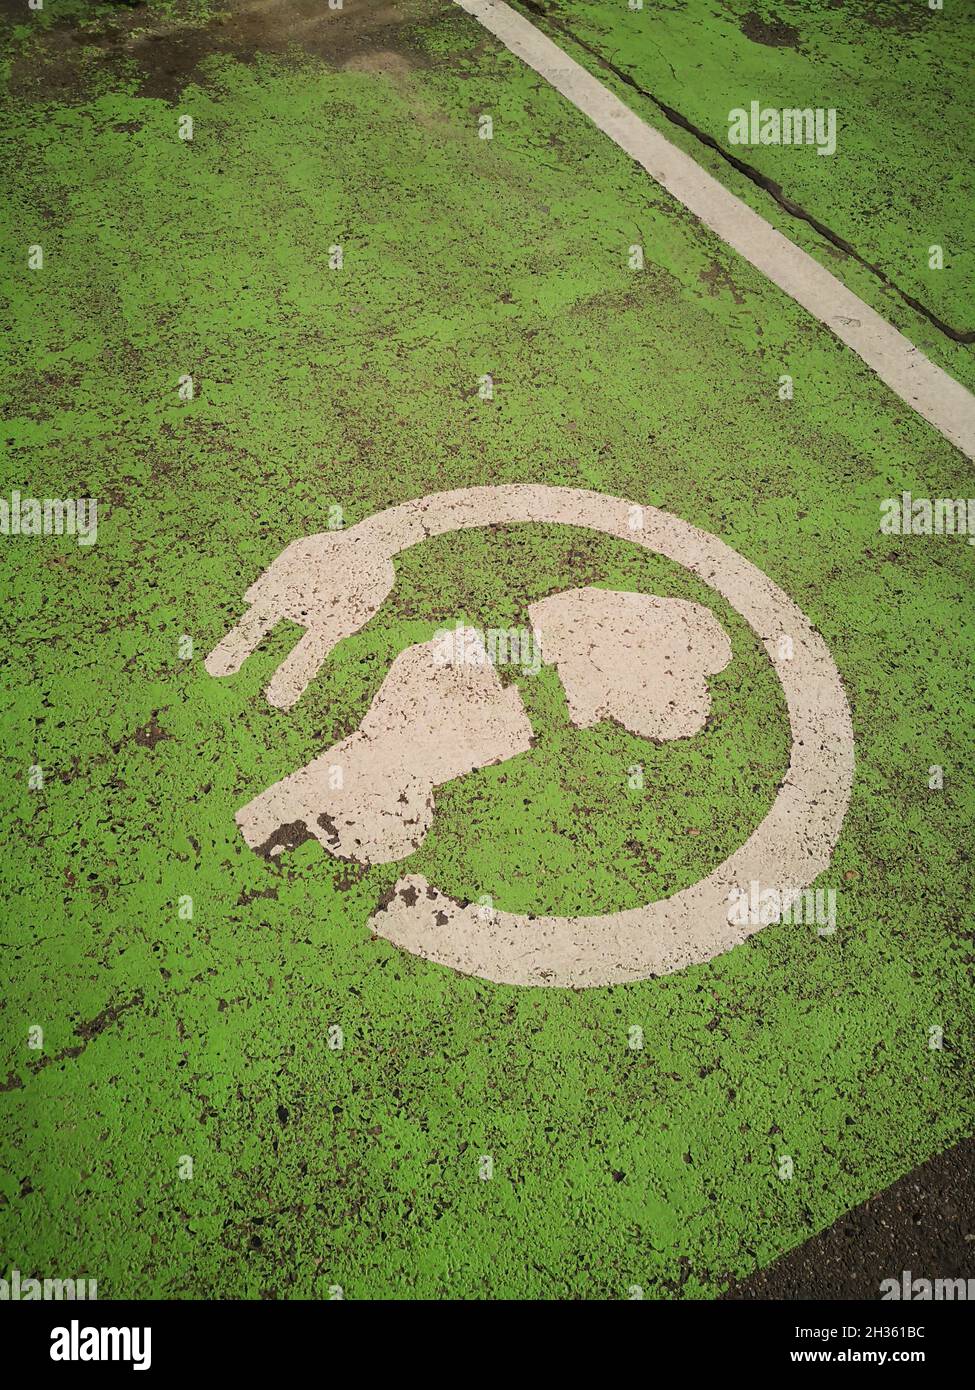 Painted sign for electric vehicle parking on the ground. Stock Photo